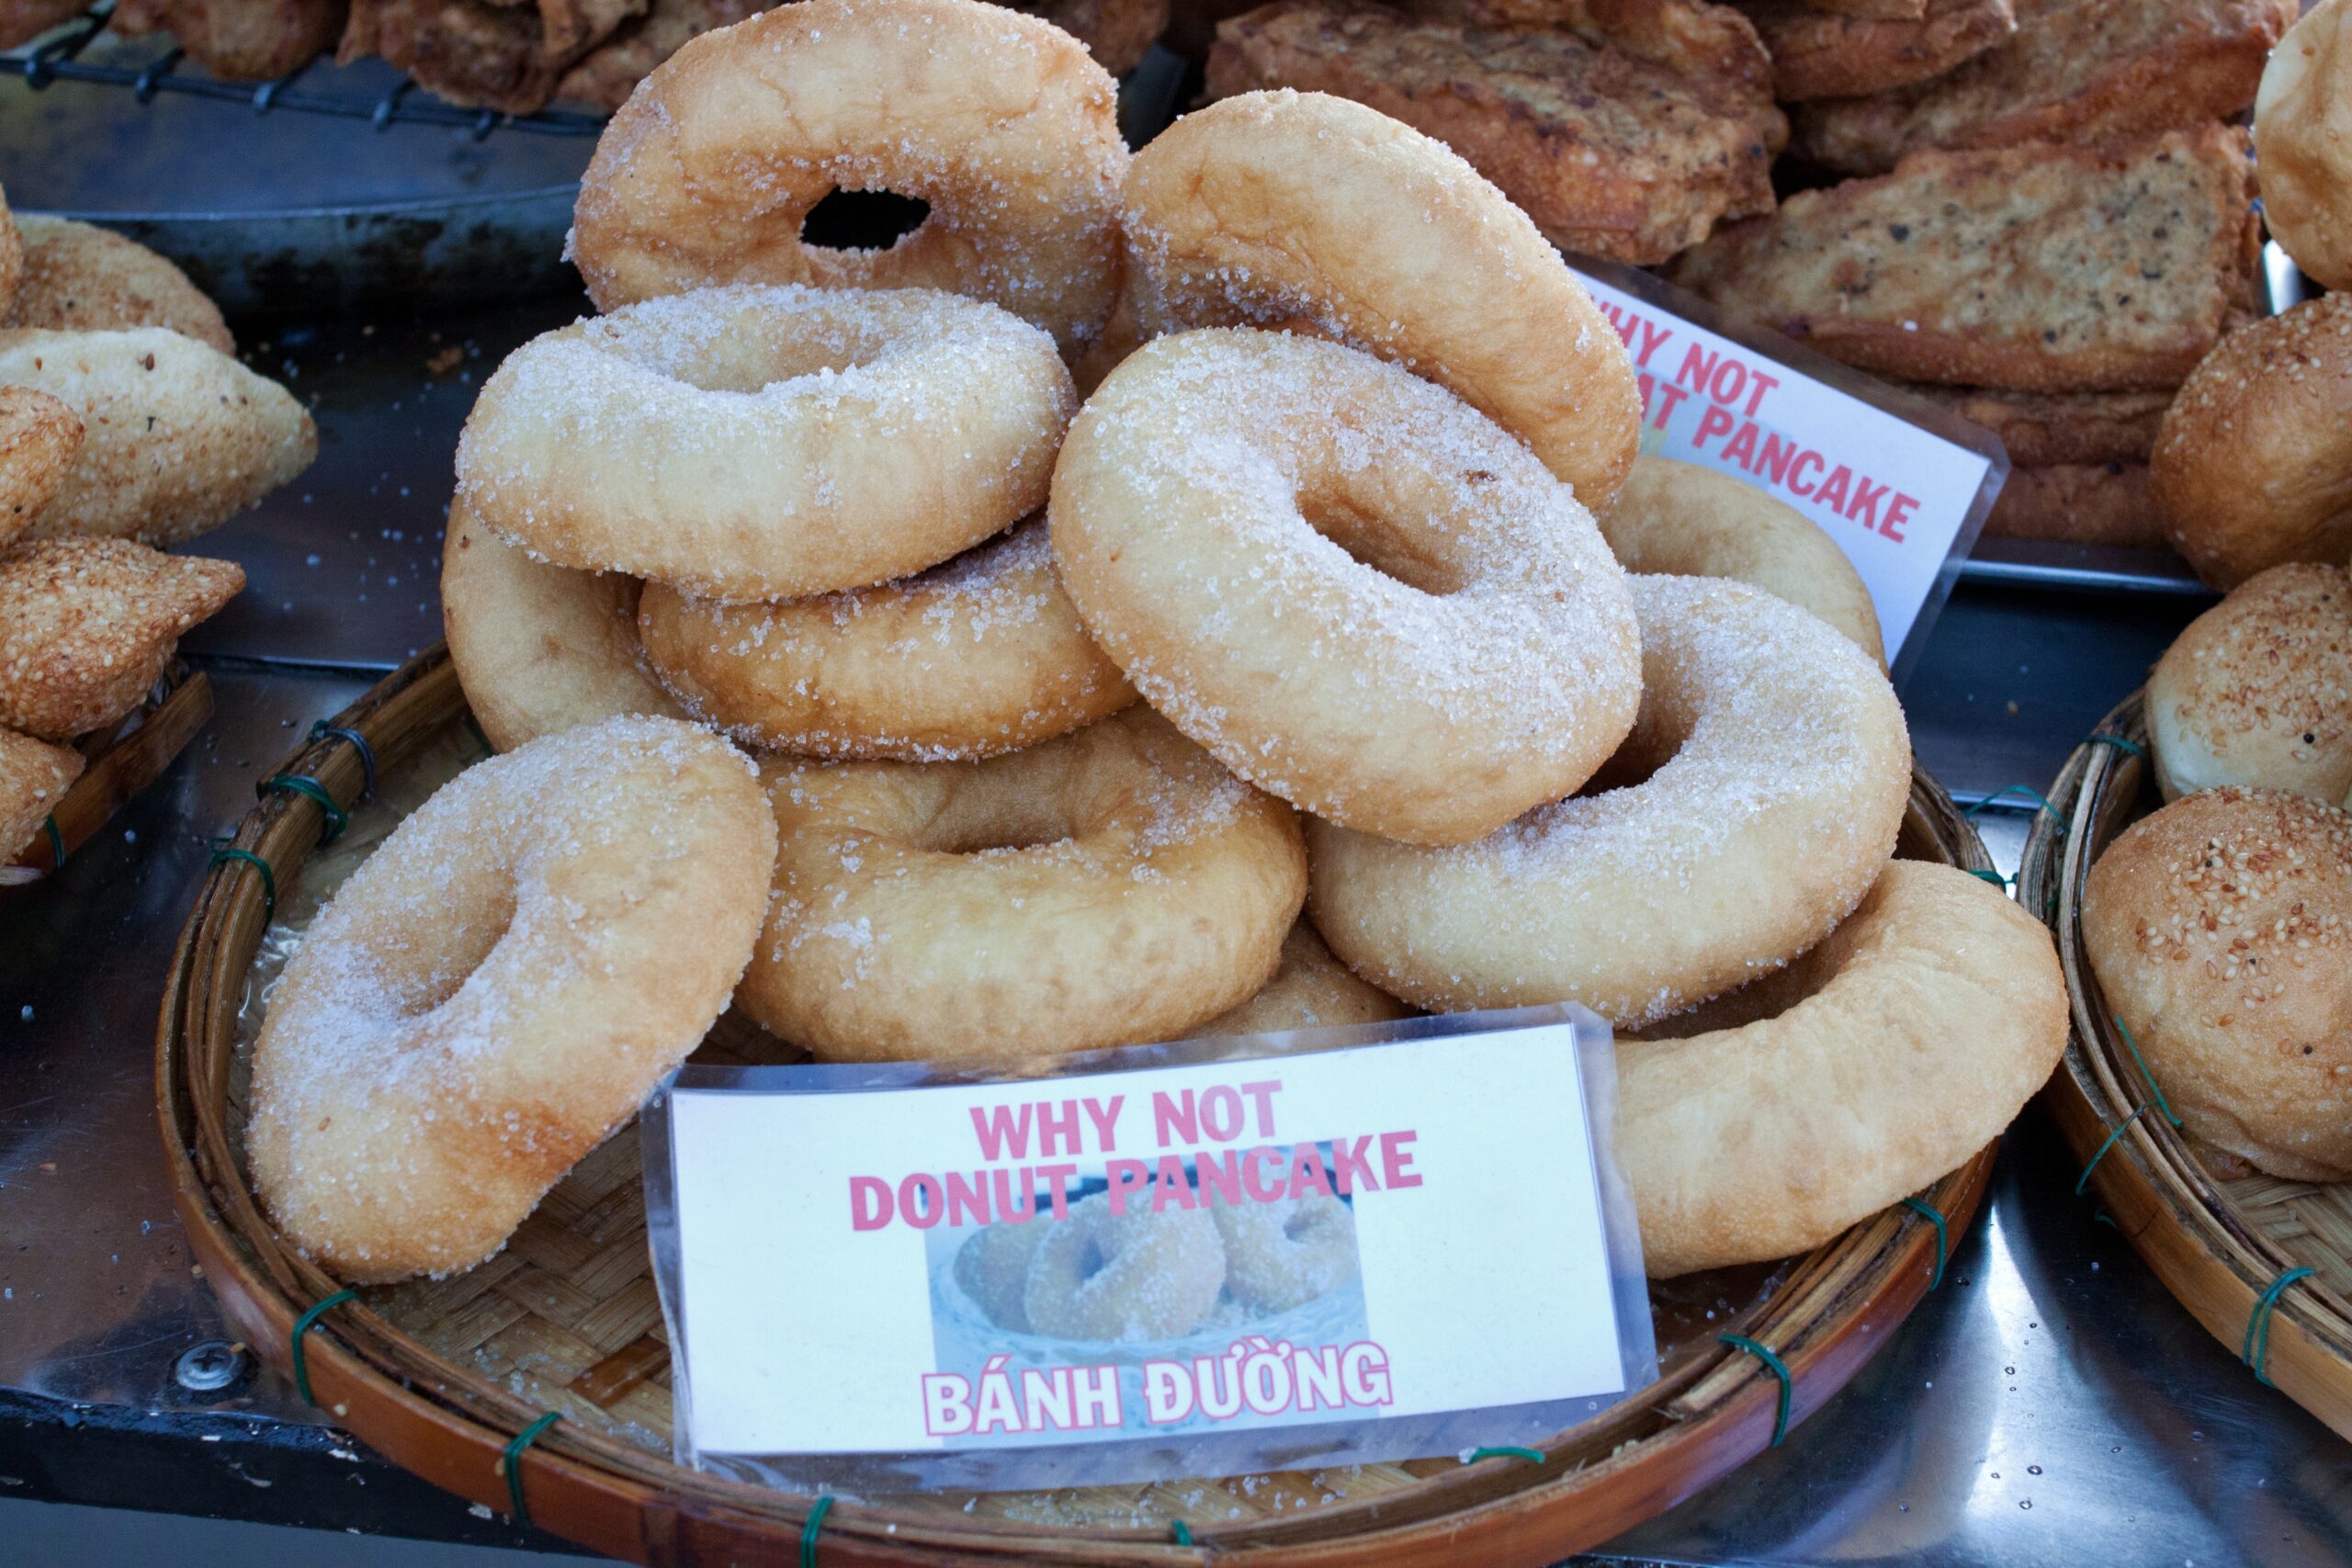 A "WHY NOT DONUT PANCAKE" sign sits in front of donuts for sale in Hoi An, Vietnam.